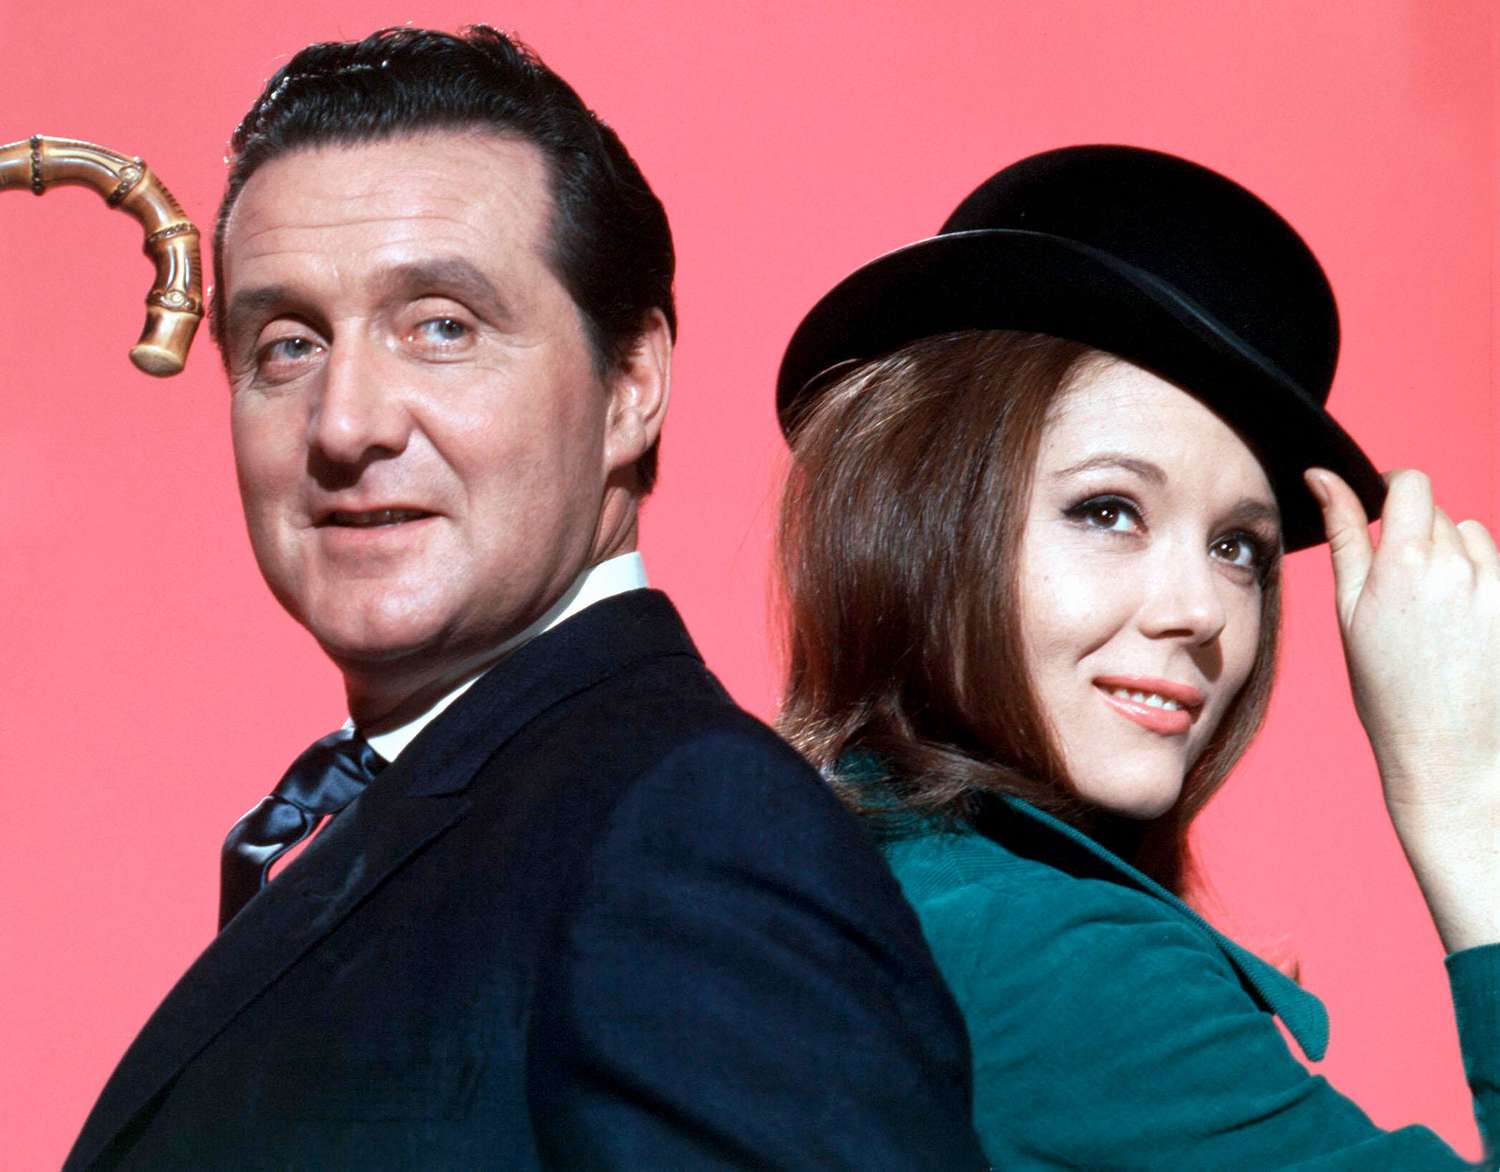 Diana Rigg's memorable roles: The Avengers, Game of Thrones, and more | EW.com